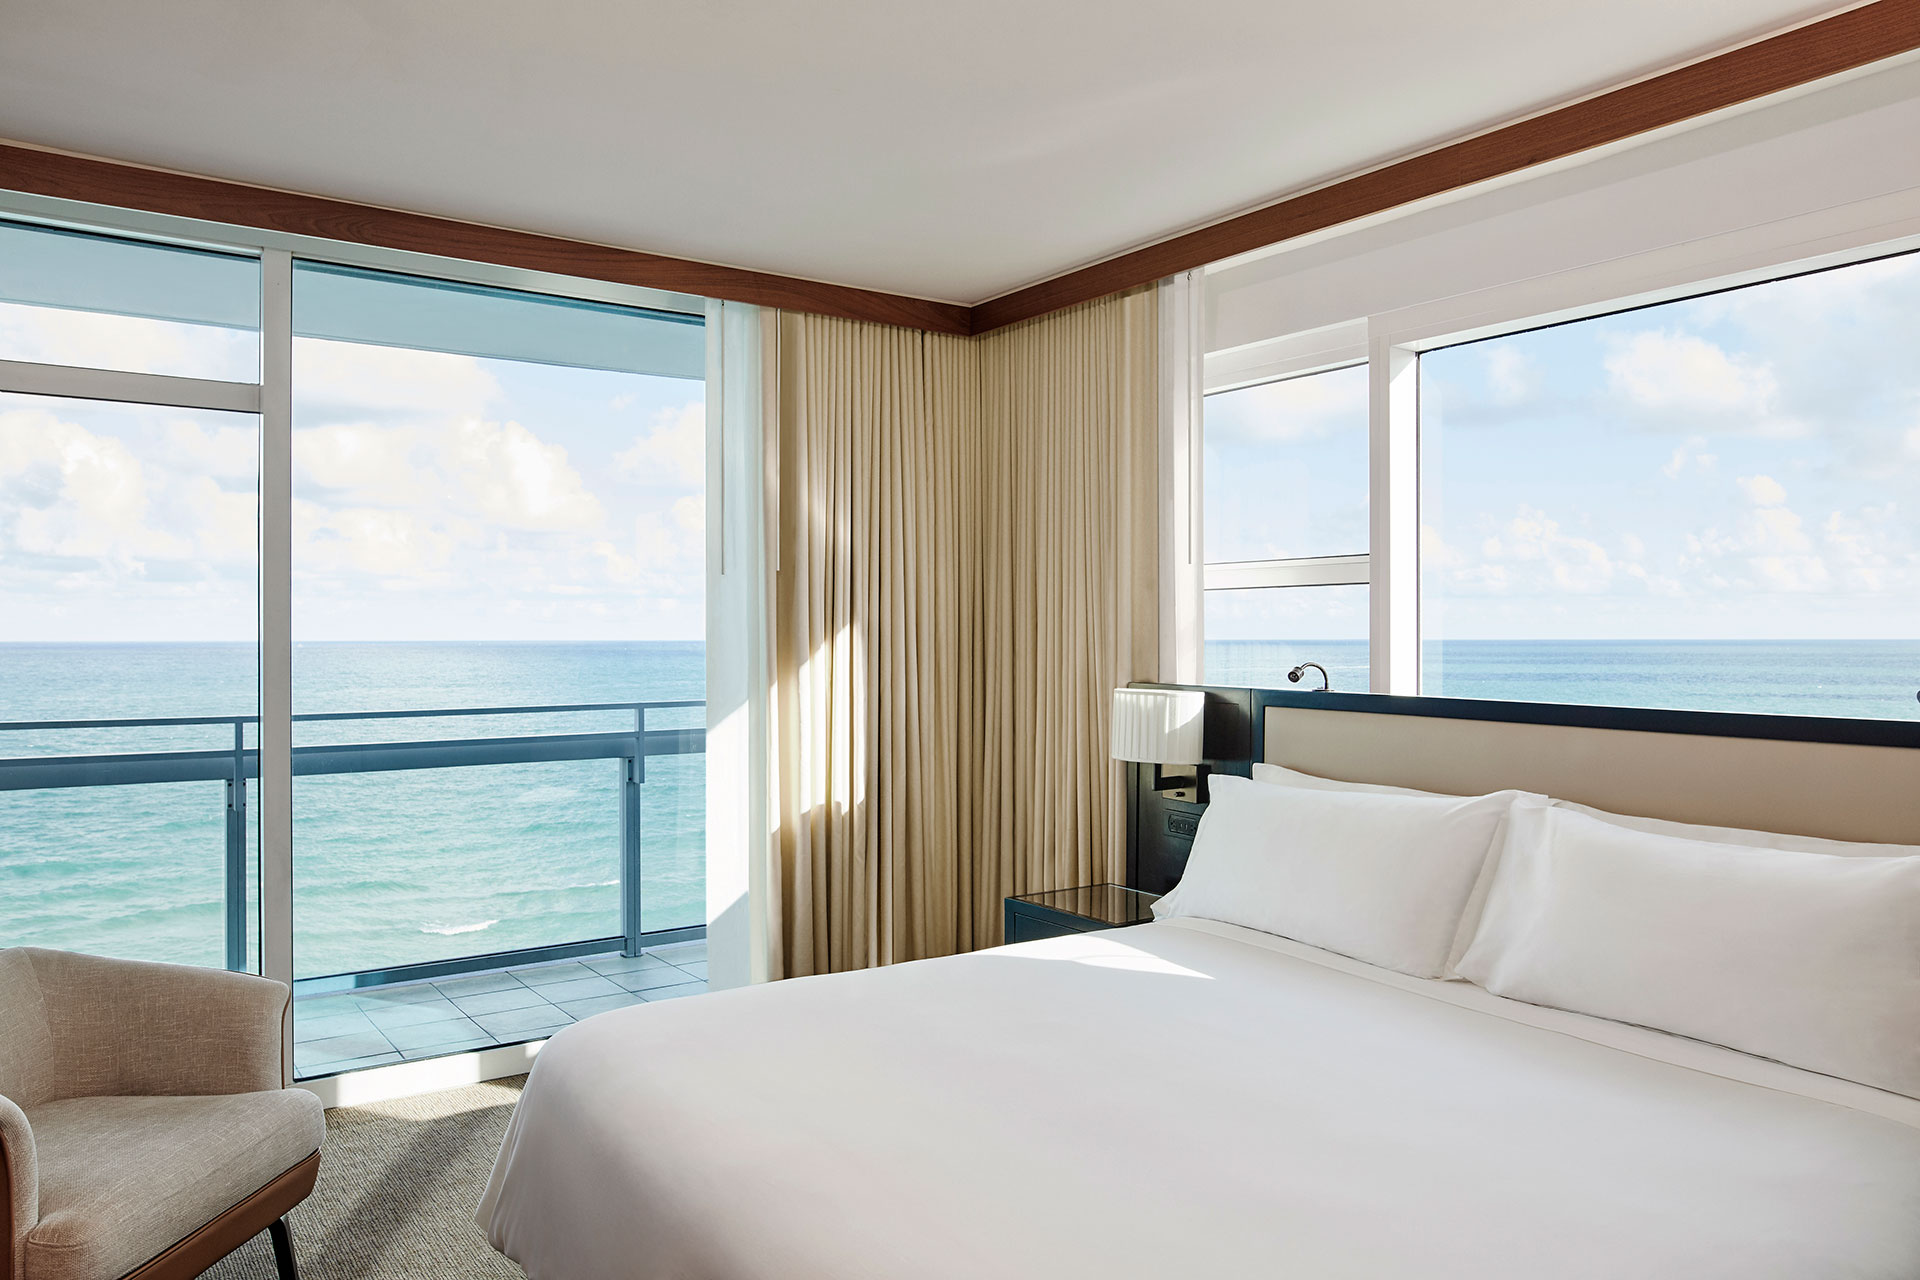 an ocean view suite with a balcony. The bed is on the right side of the room with crisp white linens. There is a black bedside table and a light colored chair in the left corner.